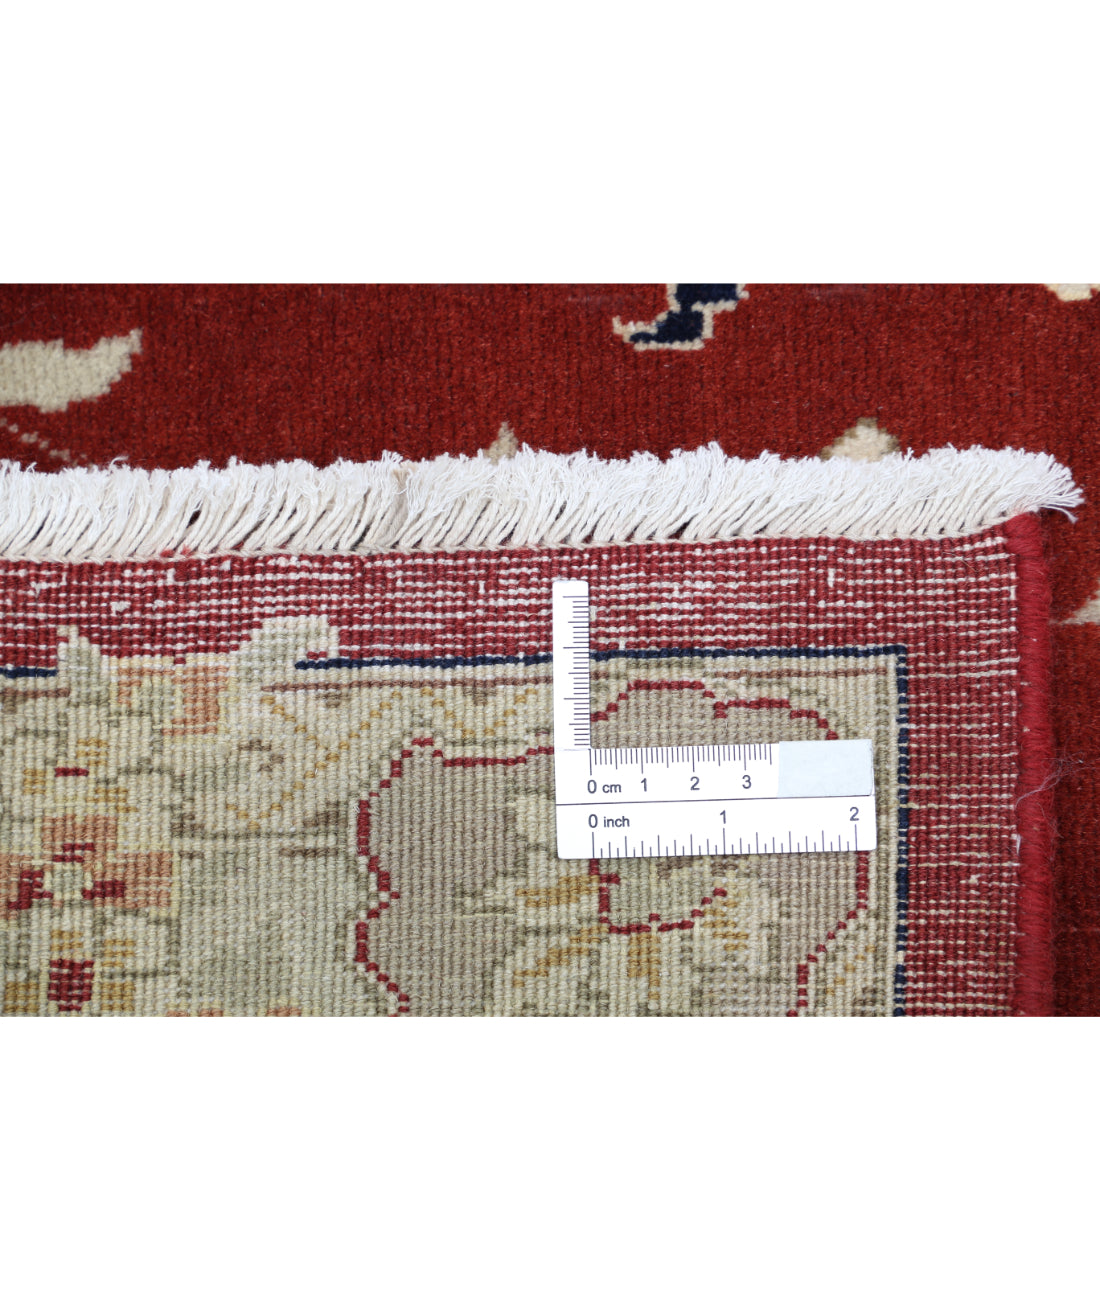 Heritage 9'9'' X 13'9'' Hand-Knotted Wool Rug 9'9'' x 13'9'' (293 X 413) / Red / Blue